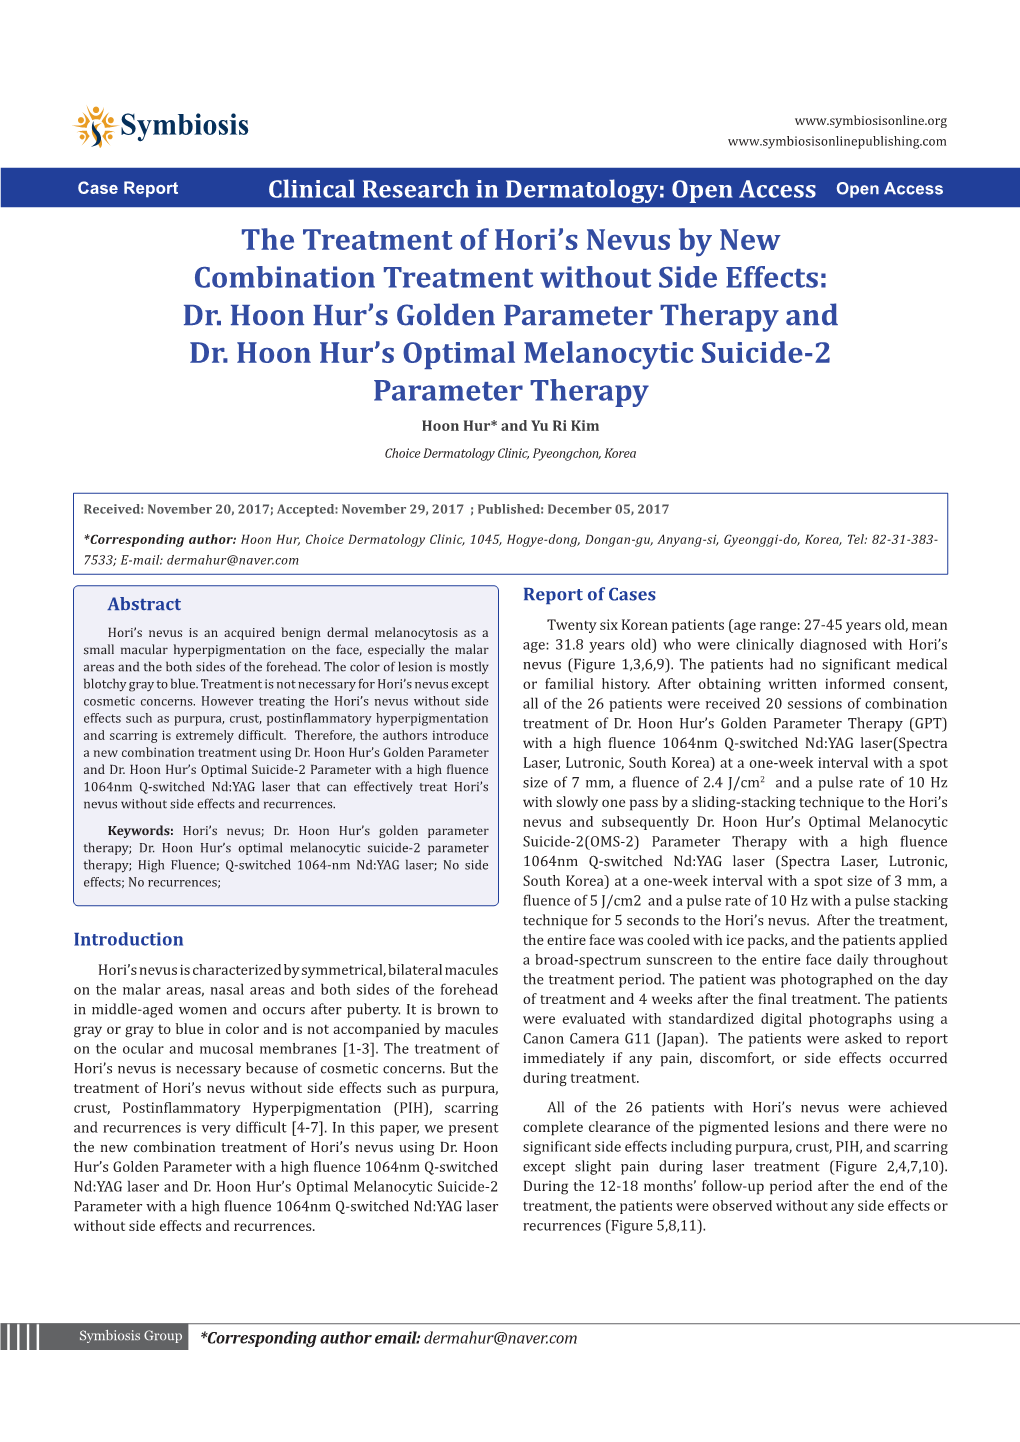 The Treatment of Hori's Nevus by New Combination Treatment Without